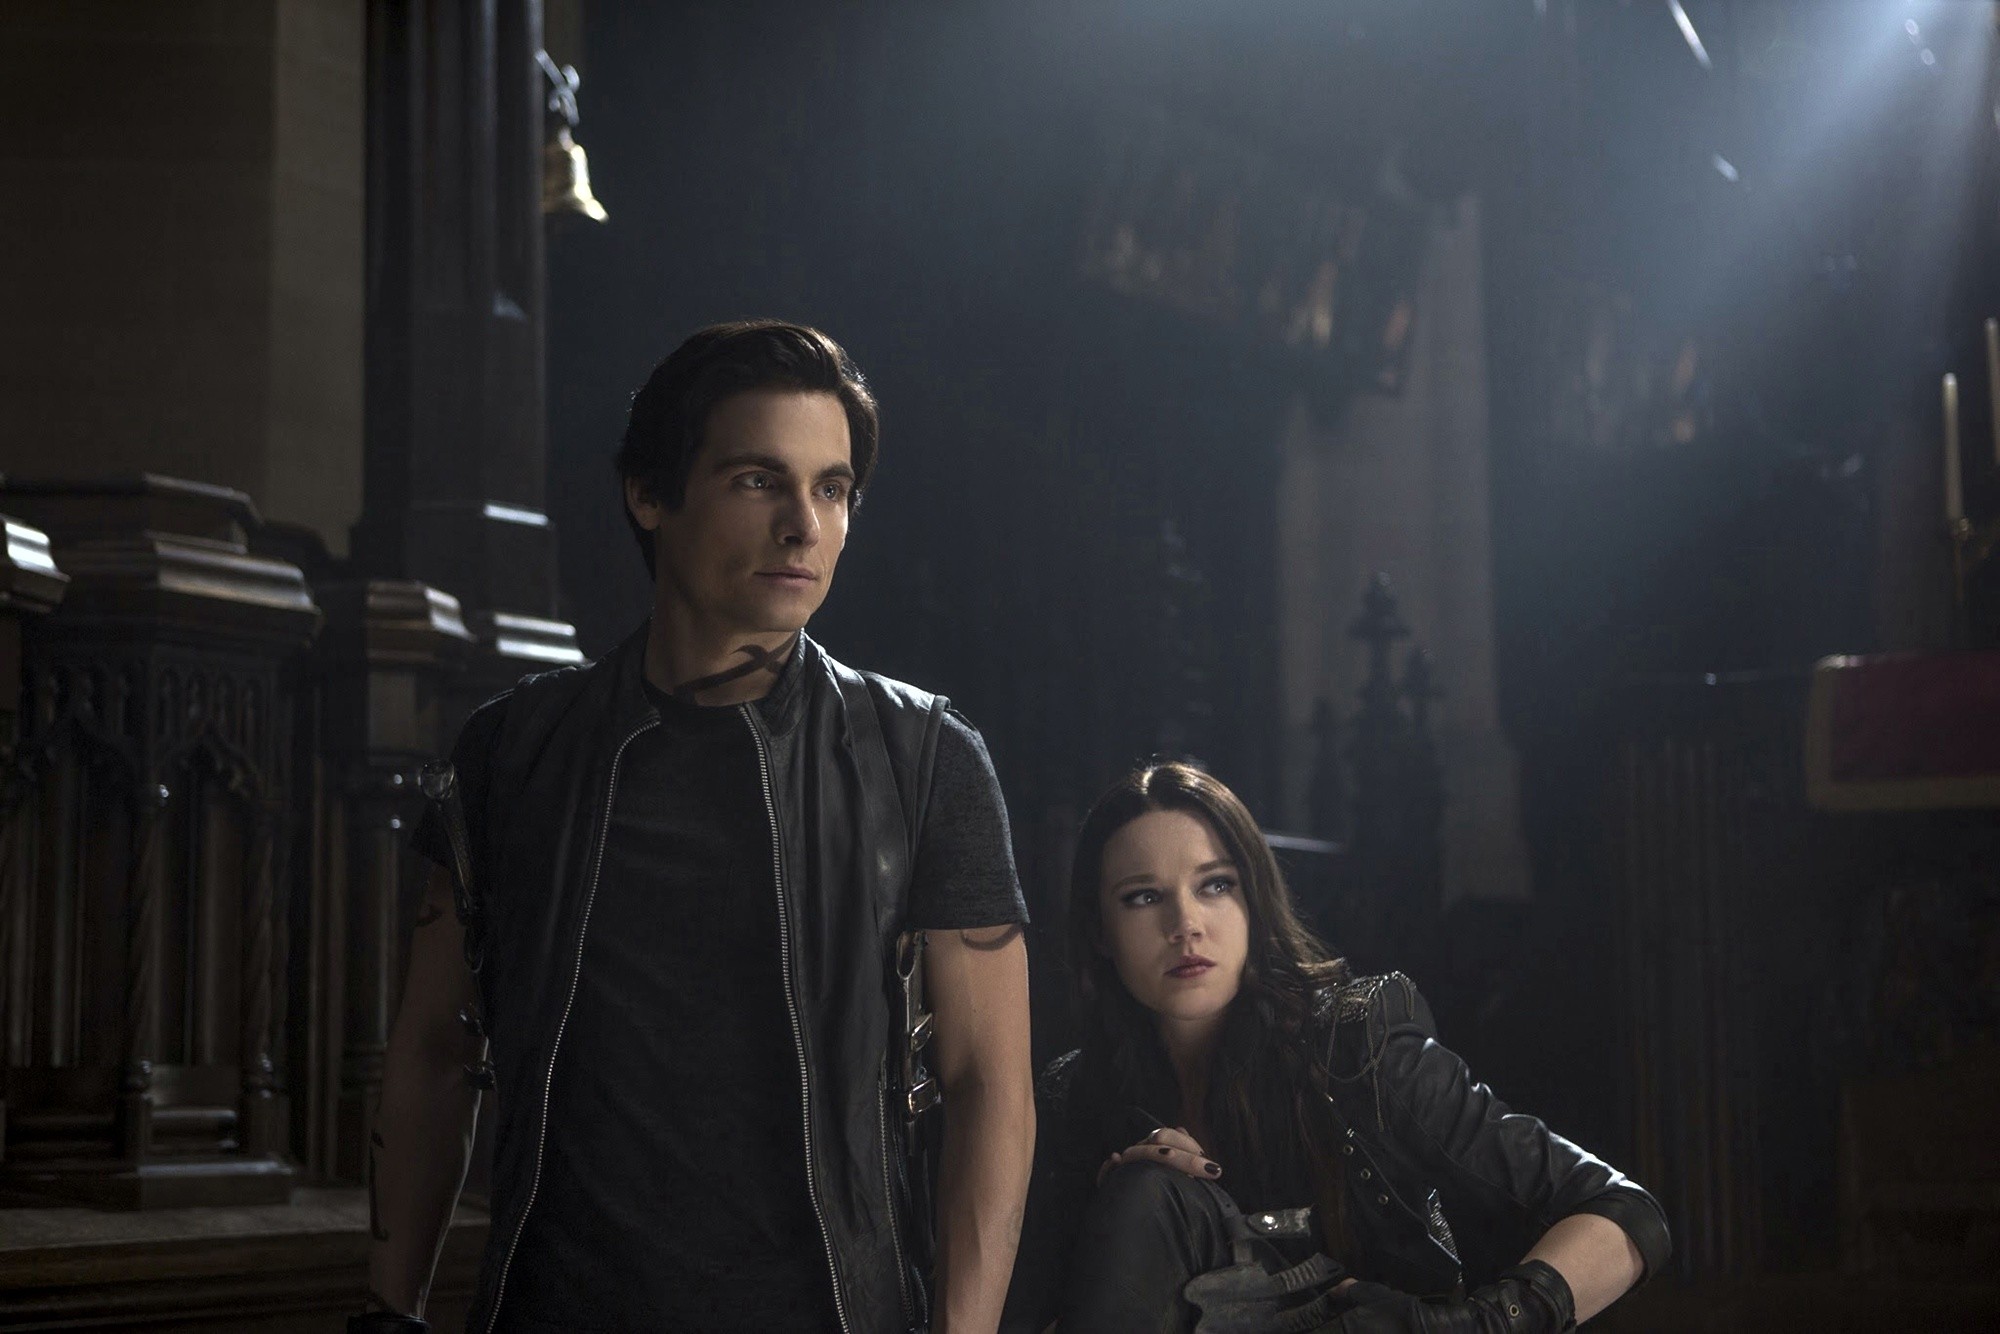 Kevin Zegers stars as Alec Lightwood and Jemima West stars as Isabelle Lightwood in Screen Gems' The Mortal Instruments: City of Bones (2013)